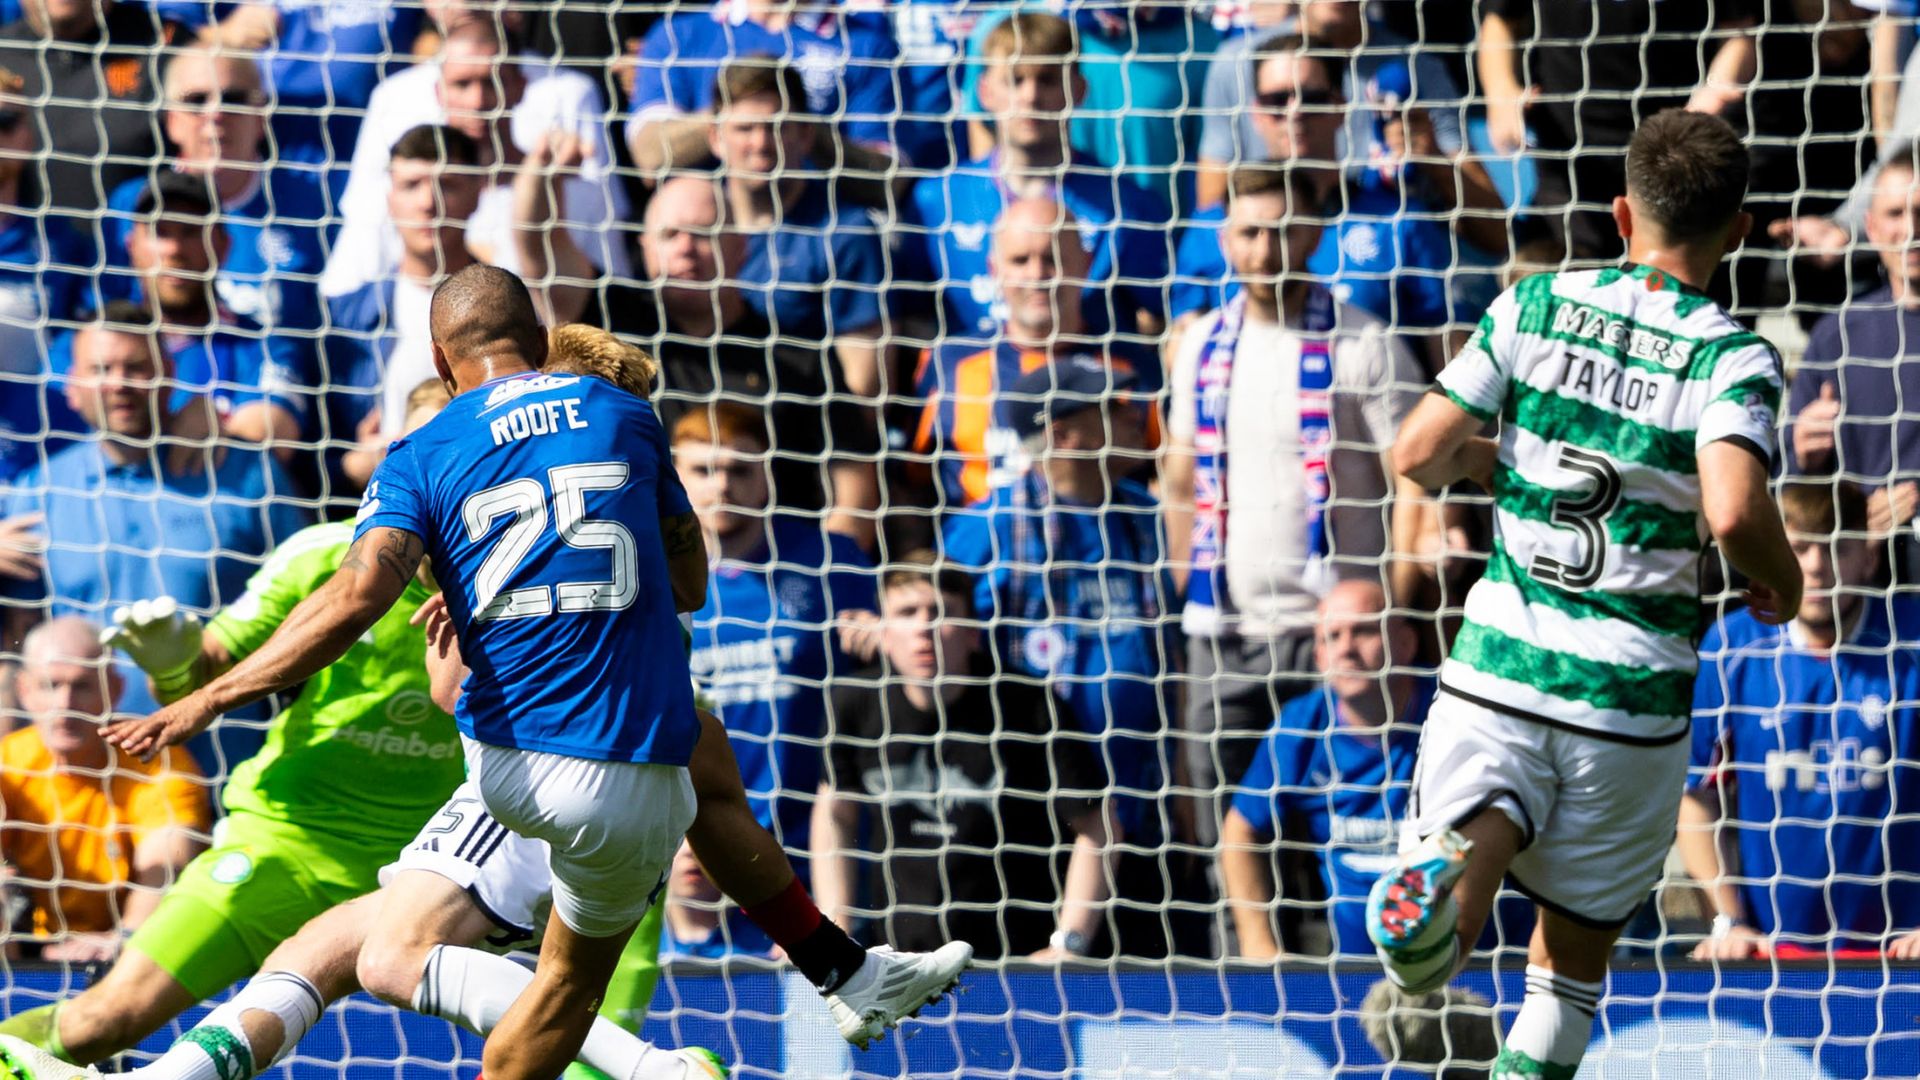 Ref Watch: 'No foul' before Roofe goal | Rangers seek clarity on VAR call